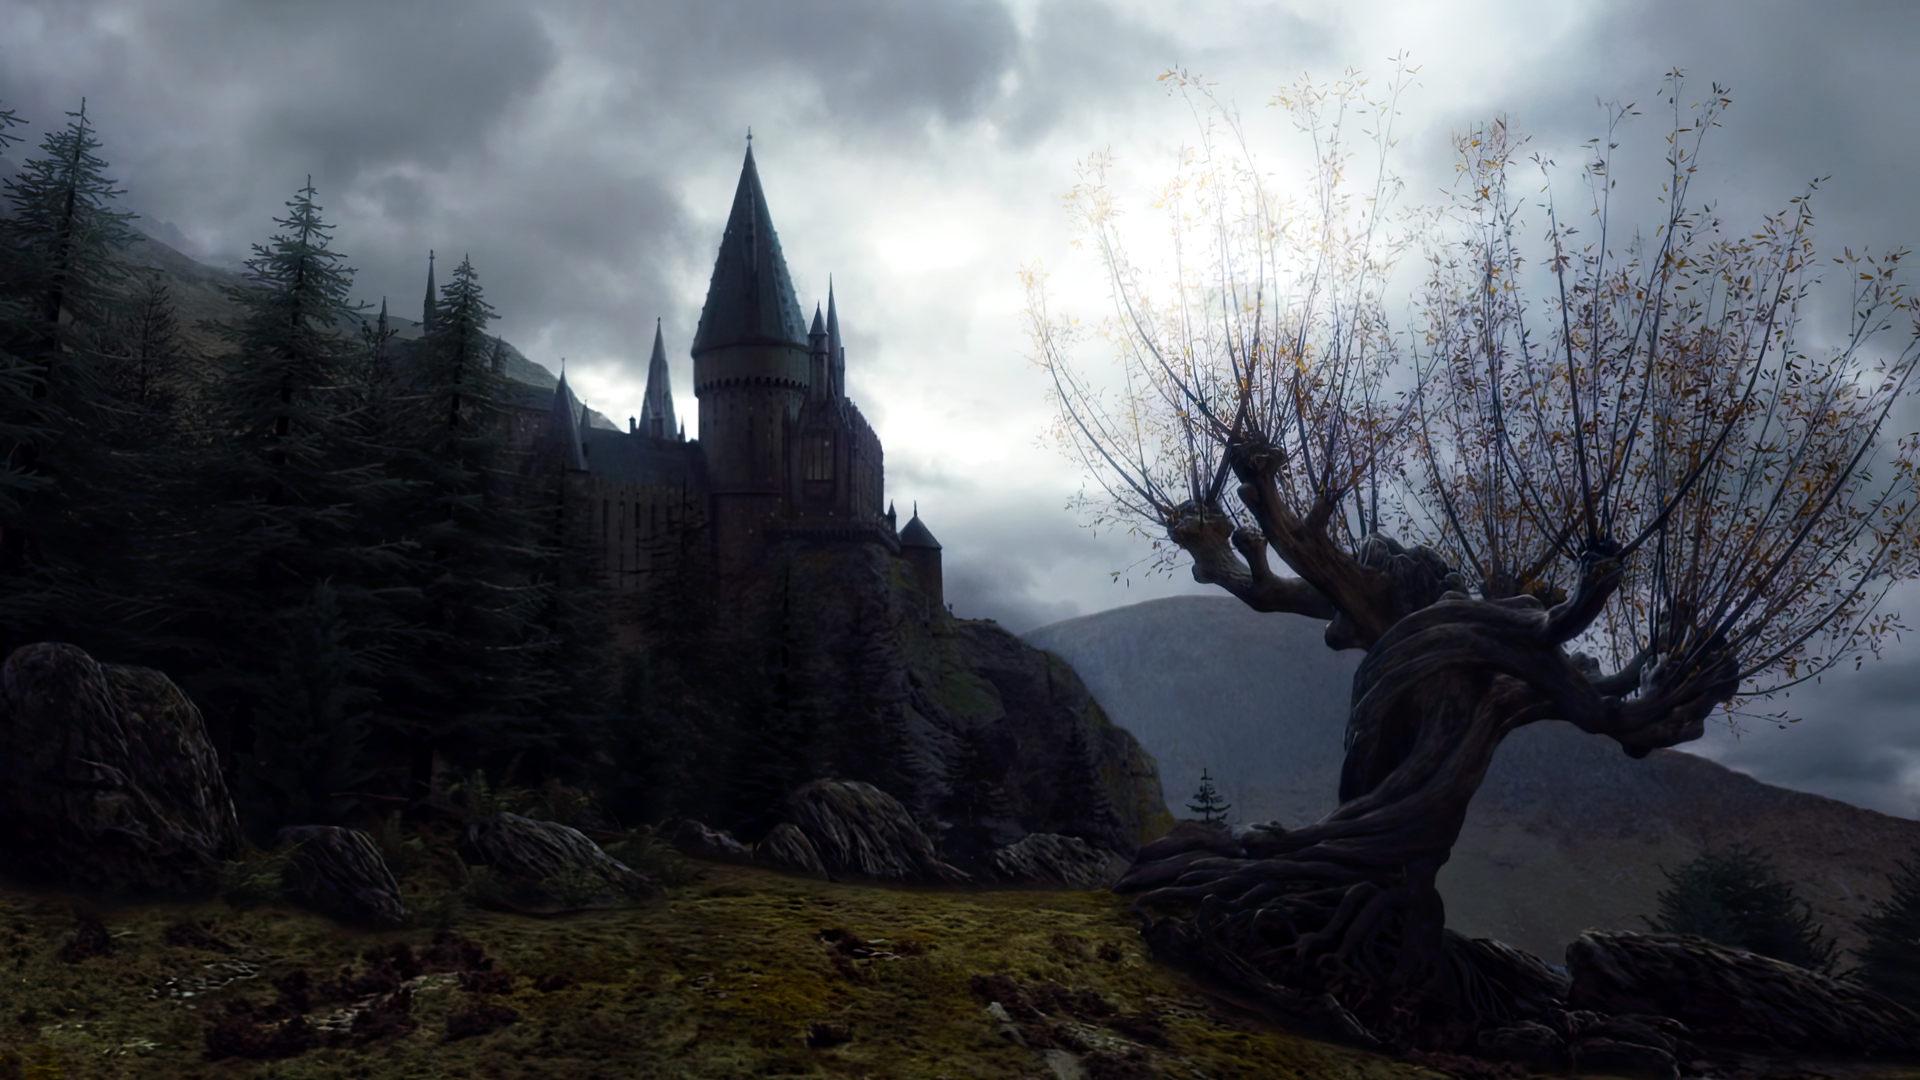 Harry Potter And The Prisoner Of Azkaban Movies Film Stills Hogwarts Whomping Willow Clouds Trees Ro 1920x1080